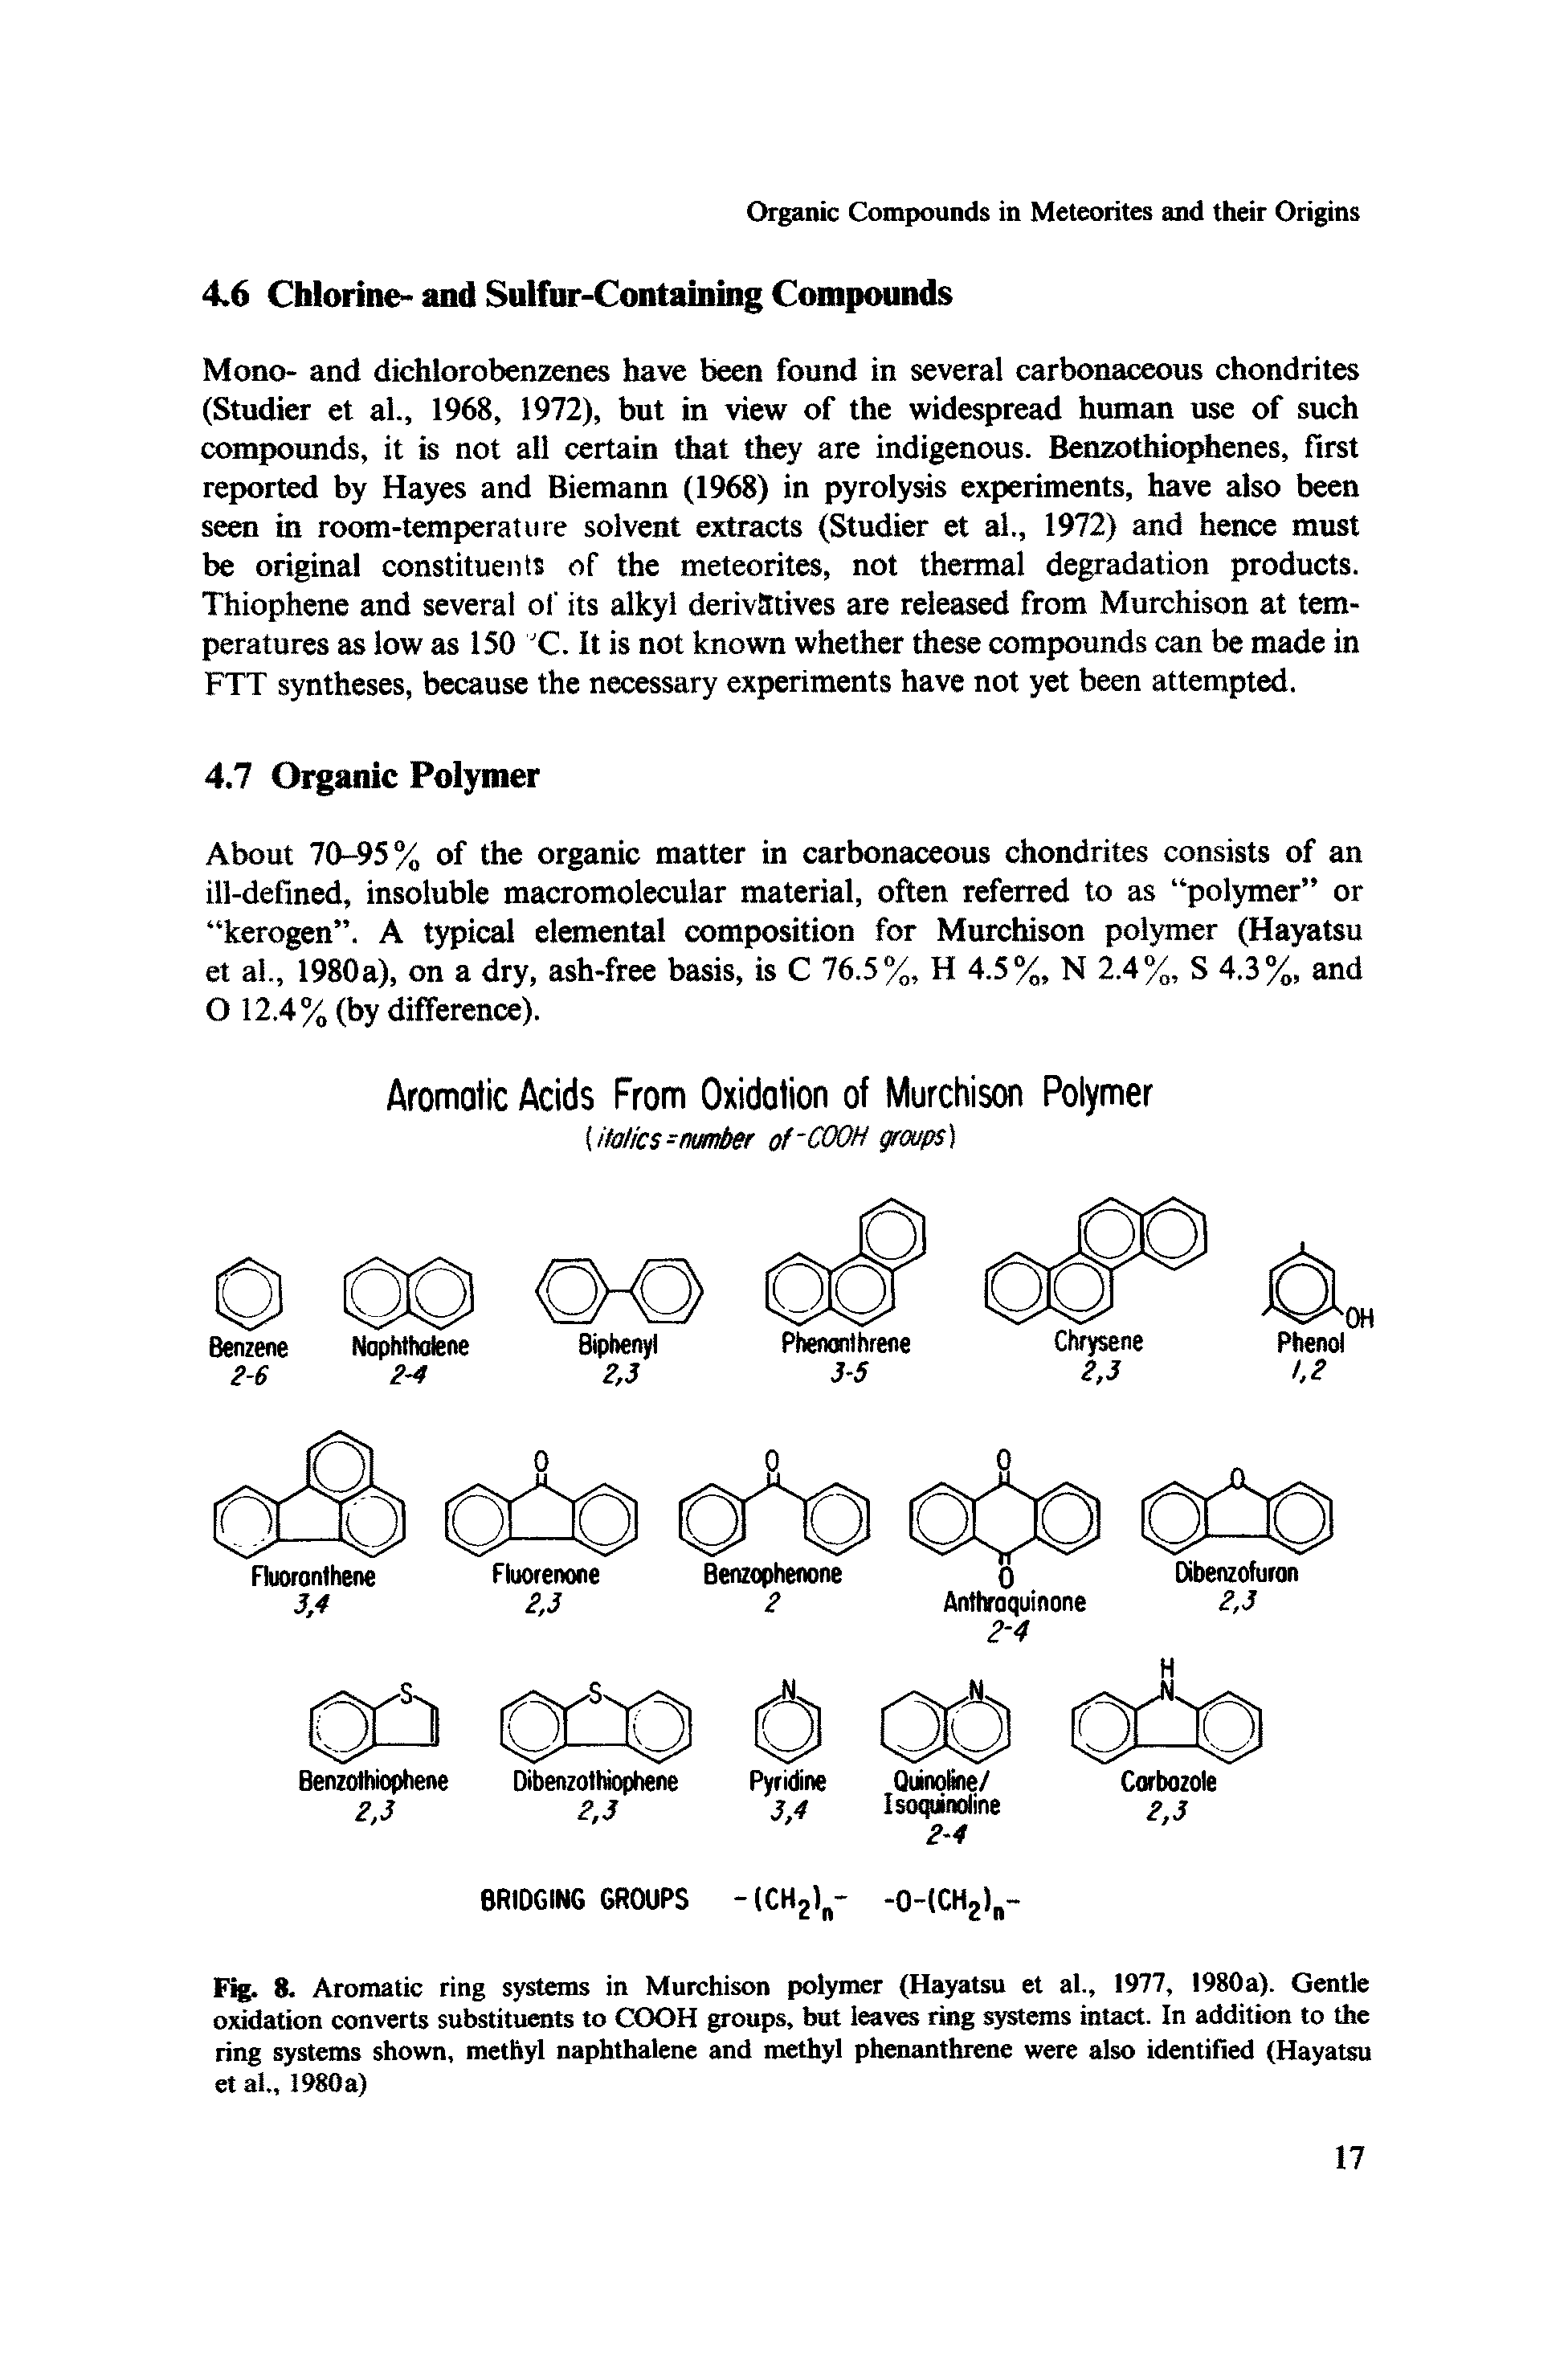 Fig. 8. Aromatic ring systems in Murchison polymer (Hayatsu et al., 1977, 1980a). Gentle oxidation converts substituents to COOH groups, but leaves ring systems intact. In addition to the ring systems shown, methyl naphthalene and methyl phenanthrene were also identified (Hayatsu et al., 1980a)...